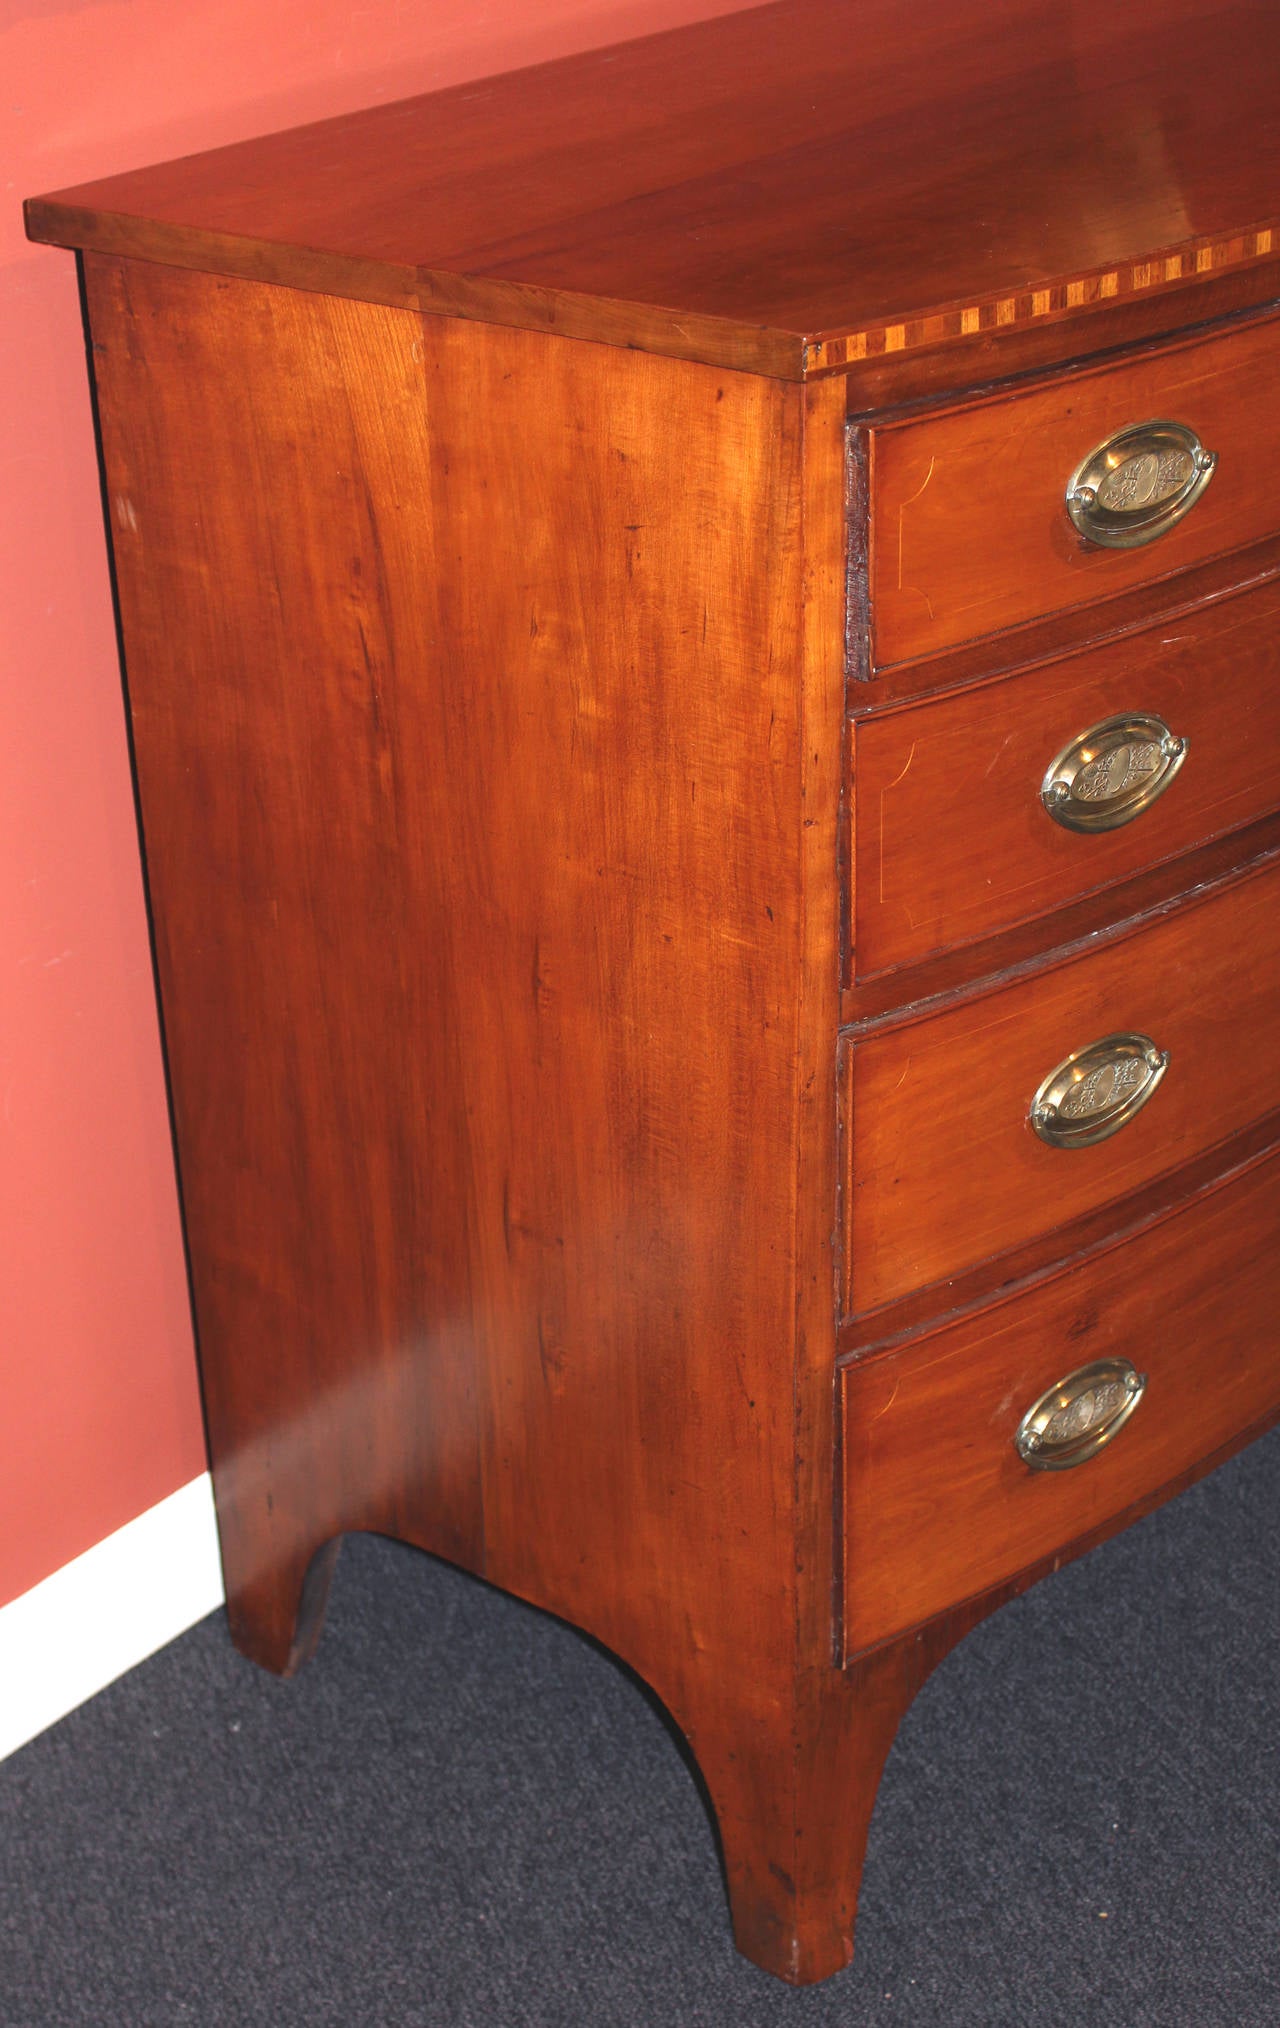 19th Century Federal Period Cherry Four Drawer Swell or Bow Front Chest with Signed Brasses